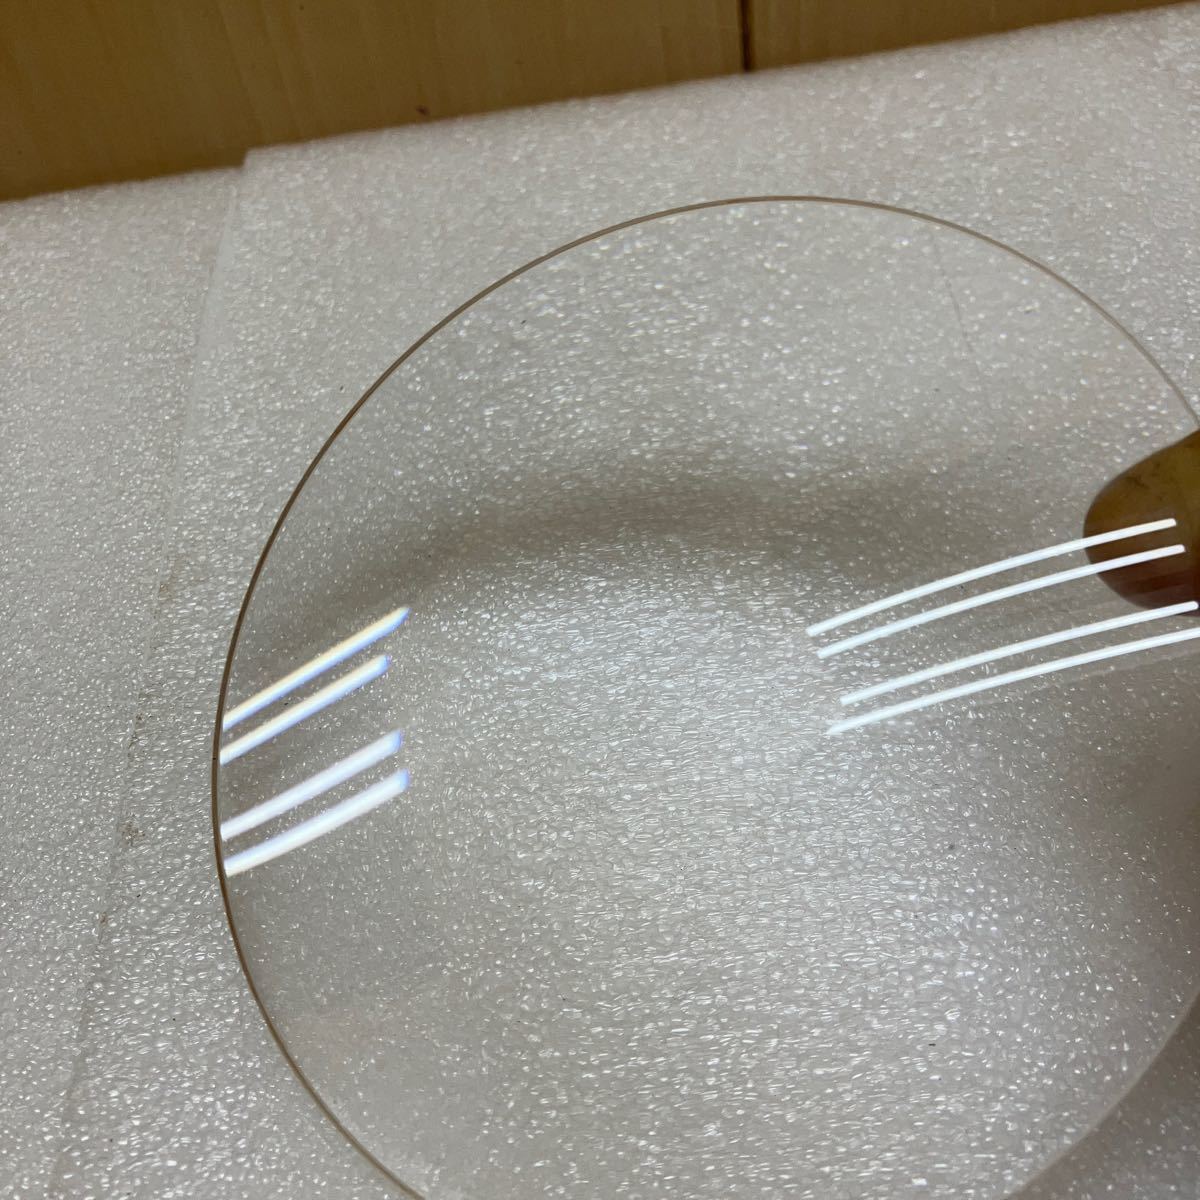 MK5472 lens magnifying glass, diameter 125mm burnt point distance 125mm/50mm,1 point kalas board 2 point physics .., sun ., enlargement for. total 3 point 20240126